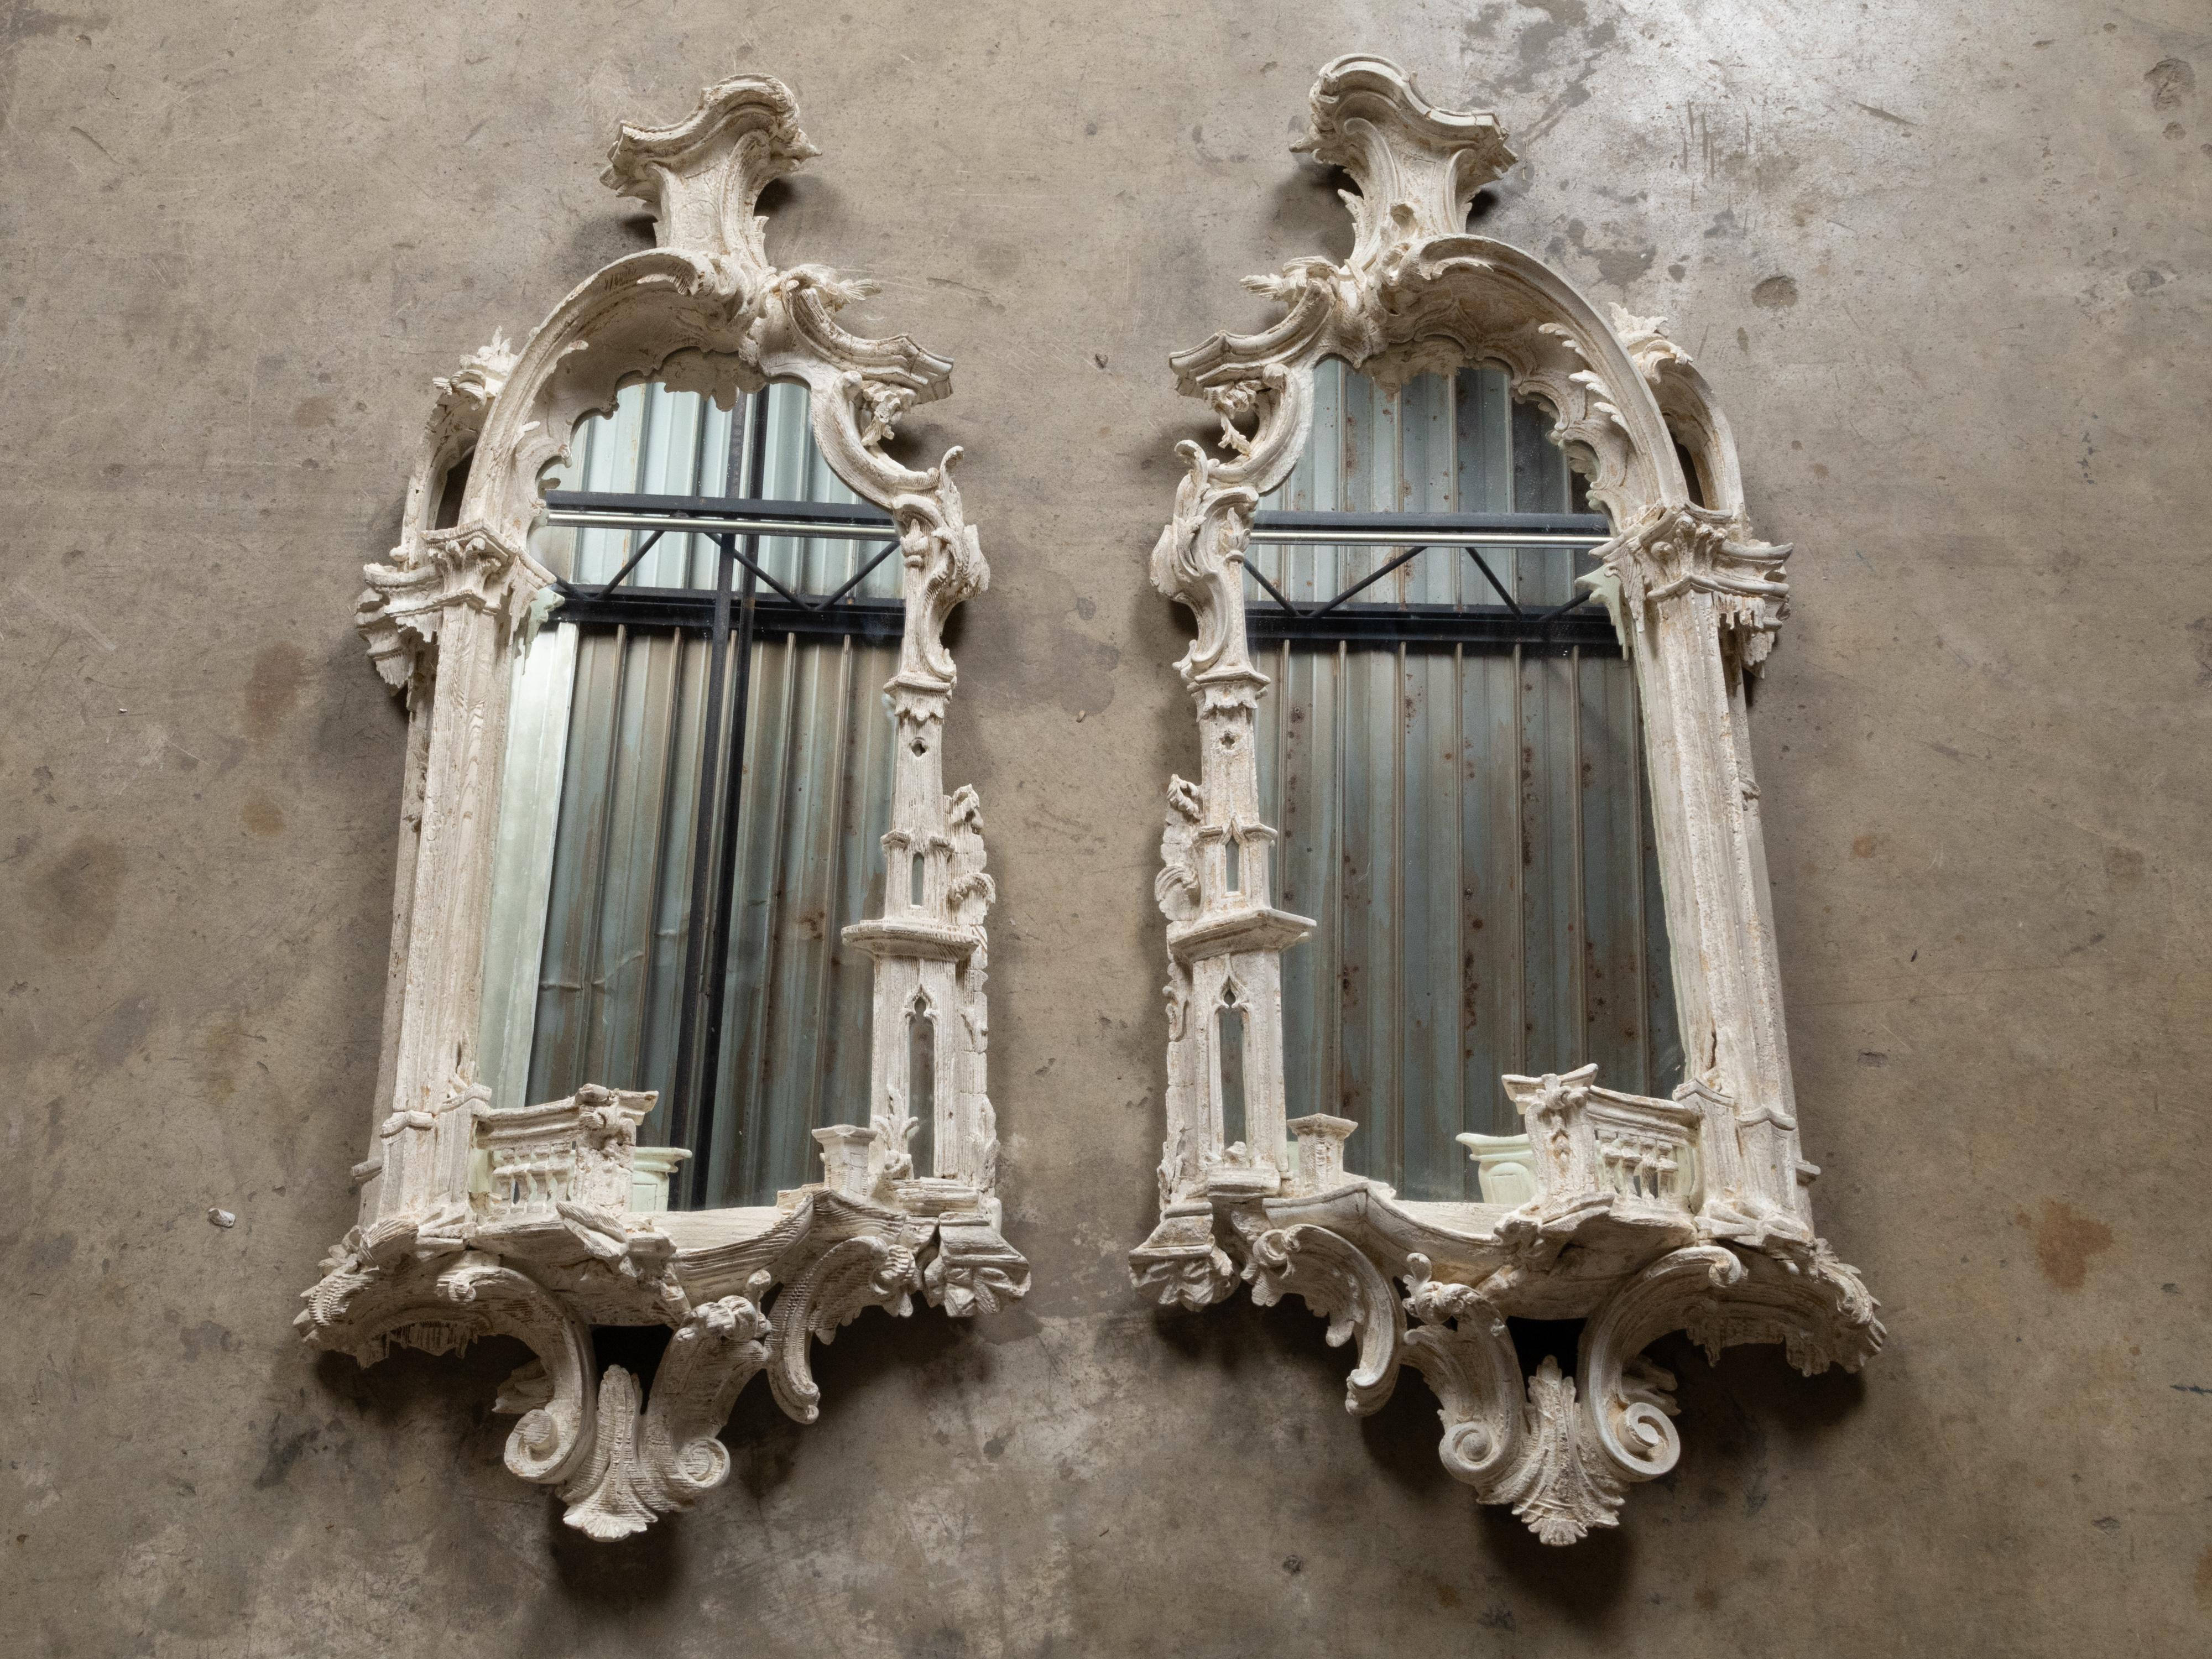 A pair of English Rococo Chippendale style carved and painted mirror from the 19th century with richly carved frames. This exquisite pair of English Rococo Chippendale style mirrors from the 19th century features richly carved frames that epitomize